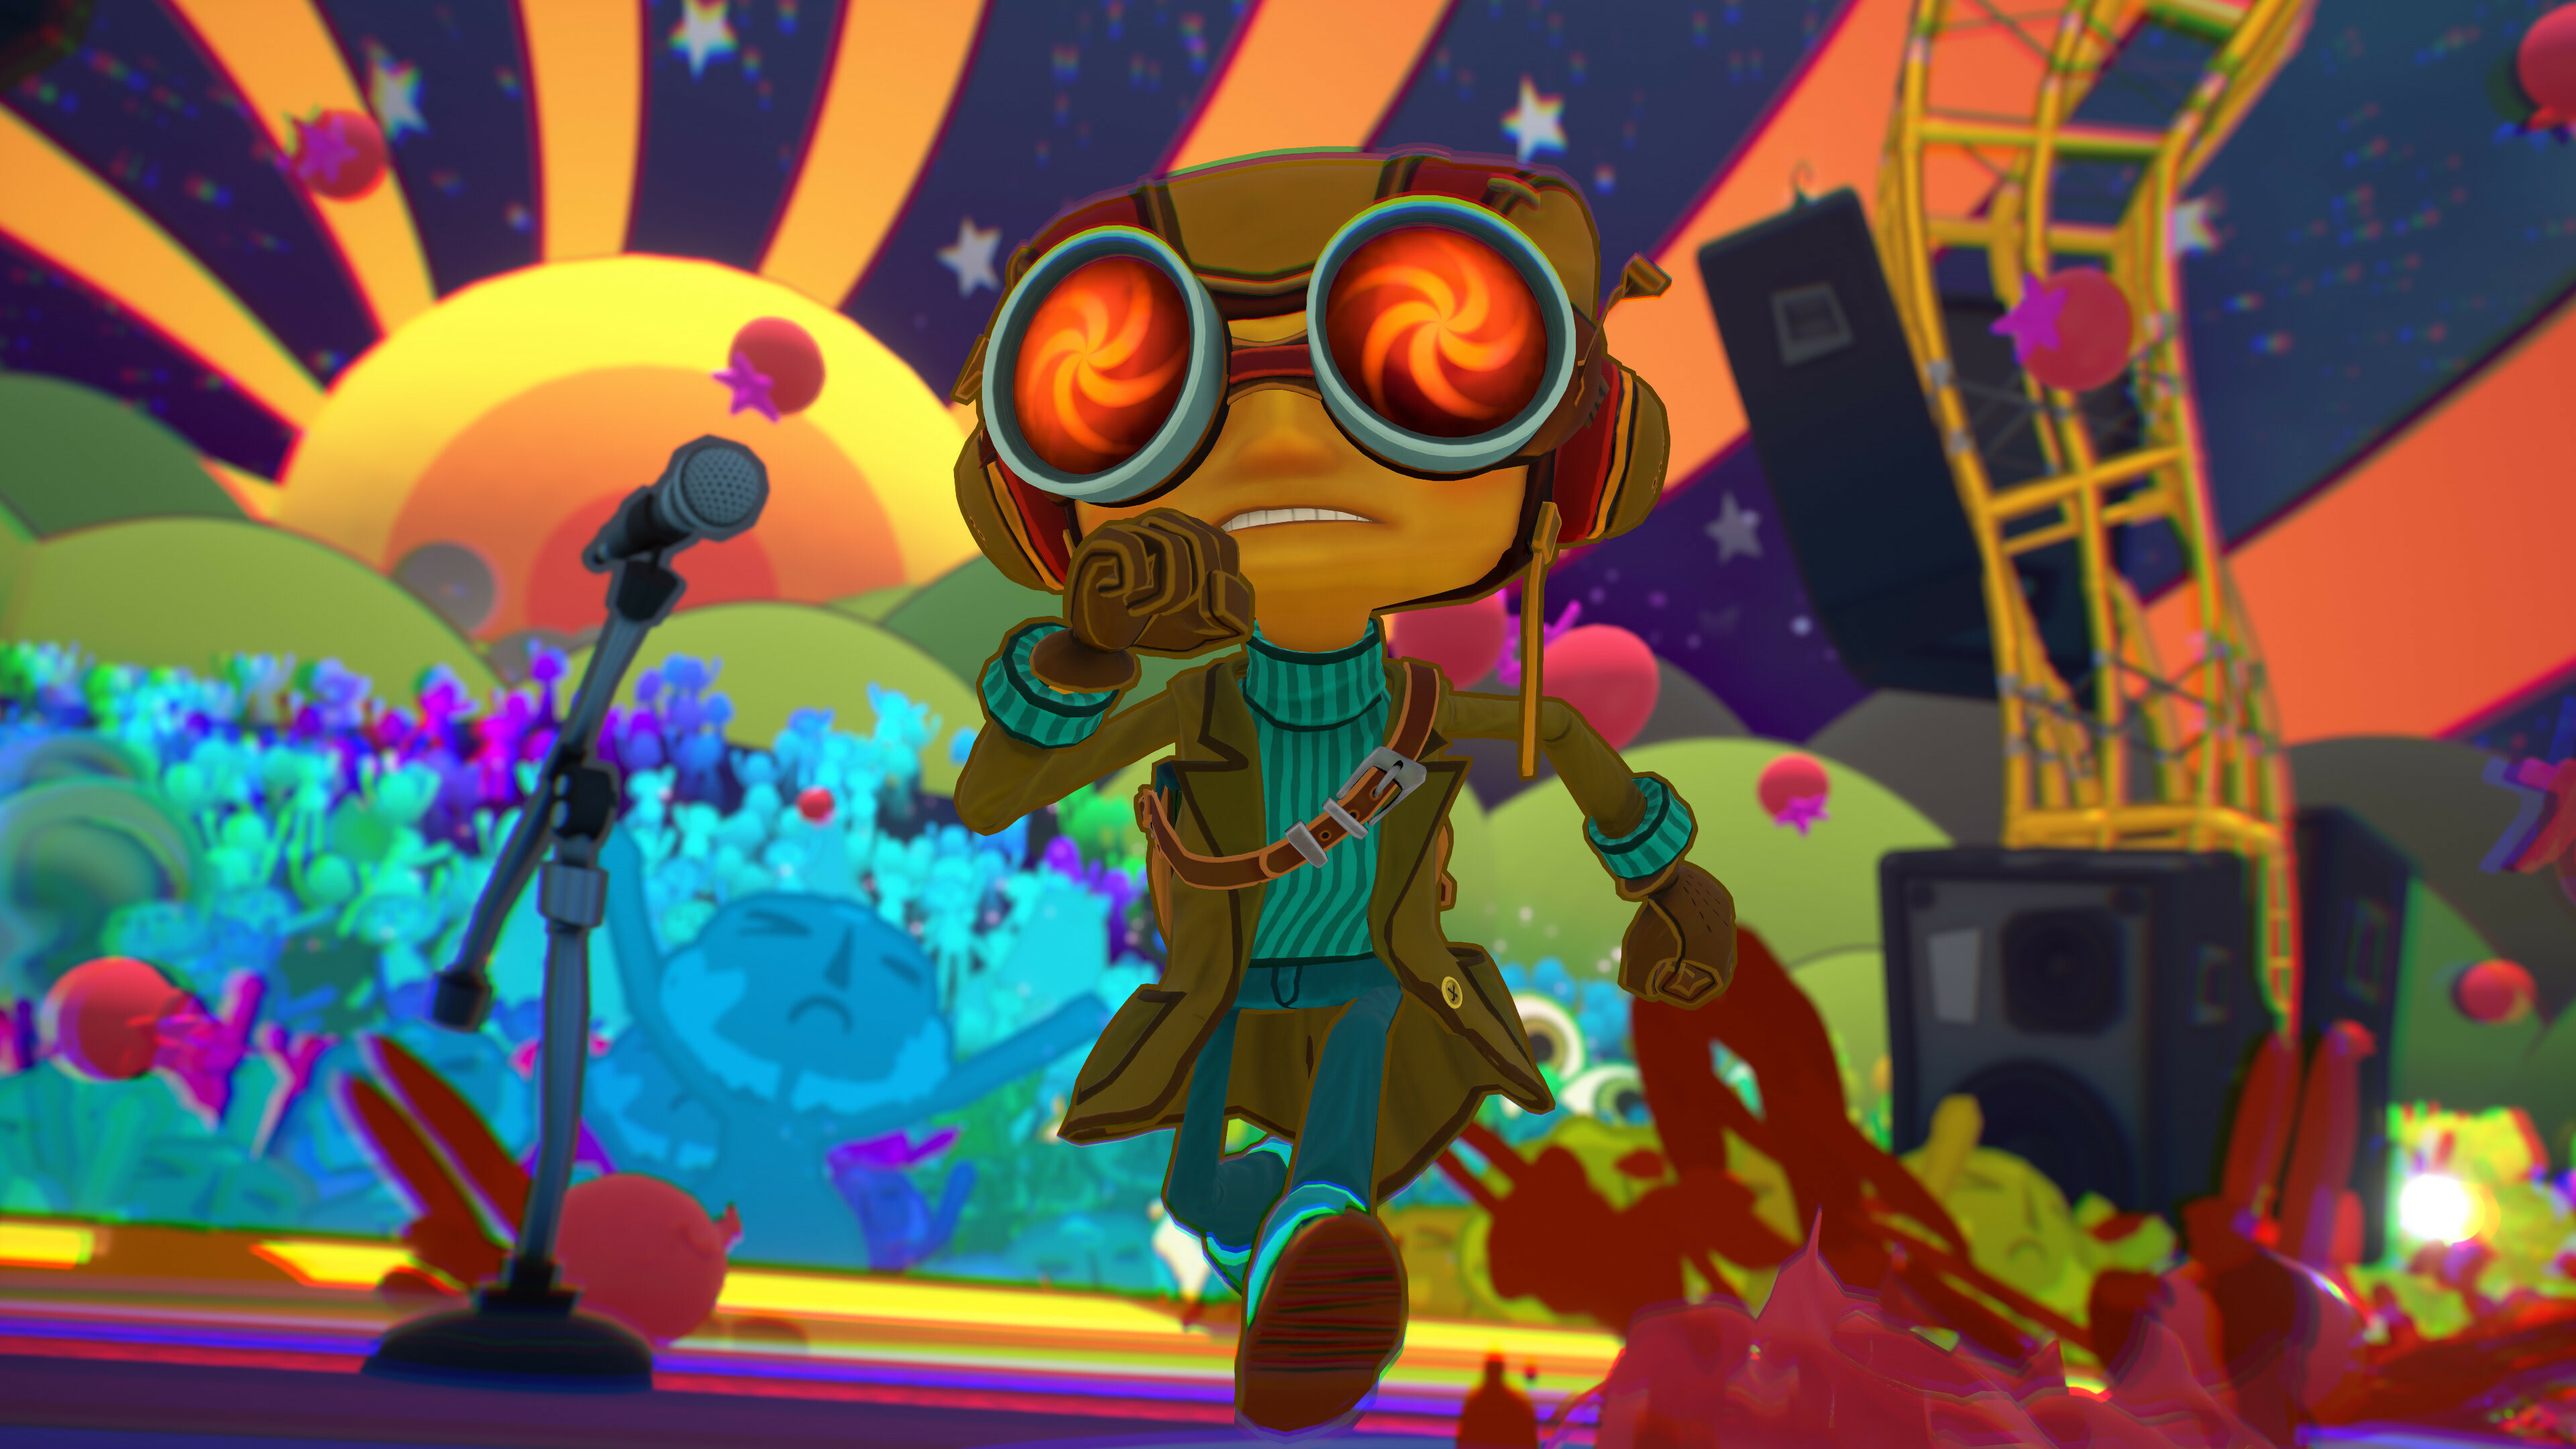 Psychonauts 2: A platform game developed by Double Fine and published by Xbox Game Studios. 3840x2160 4K Wallpaper.